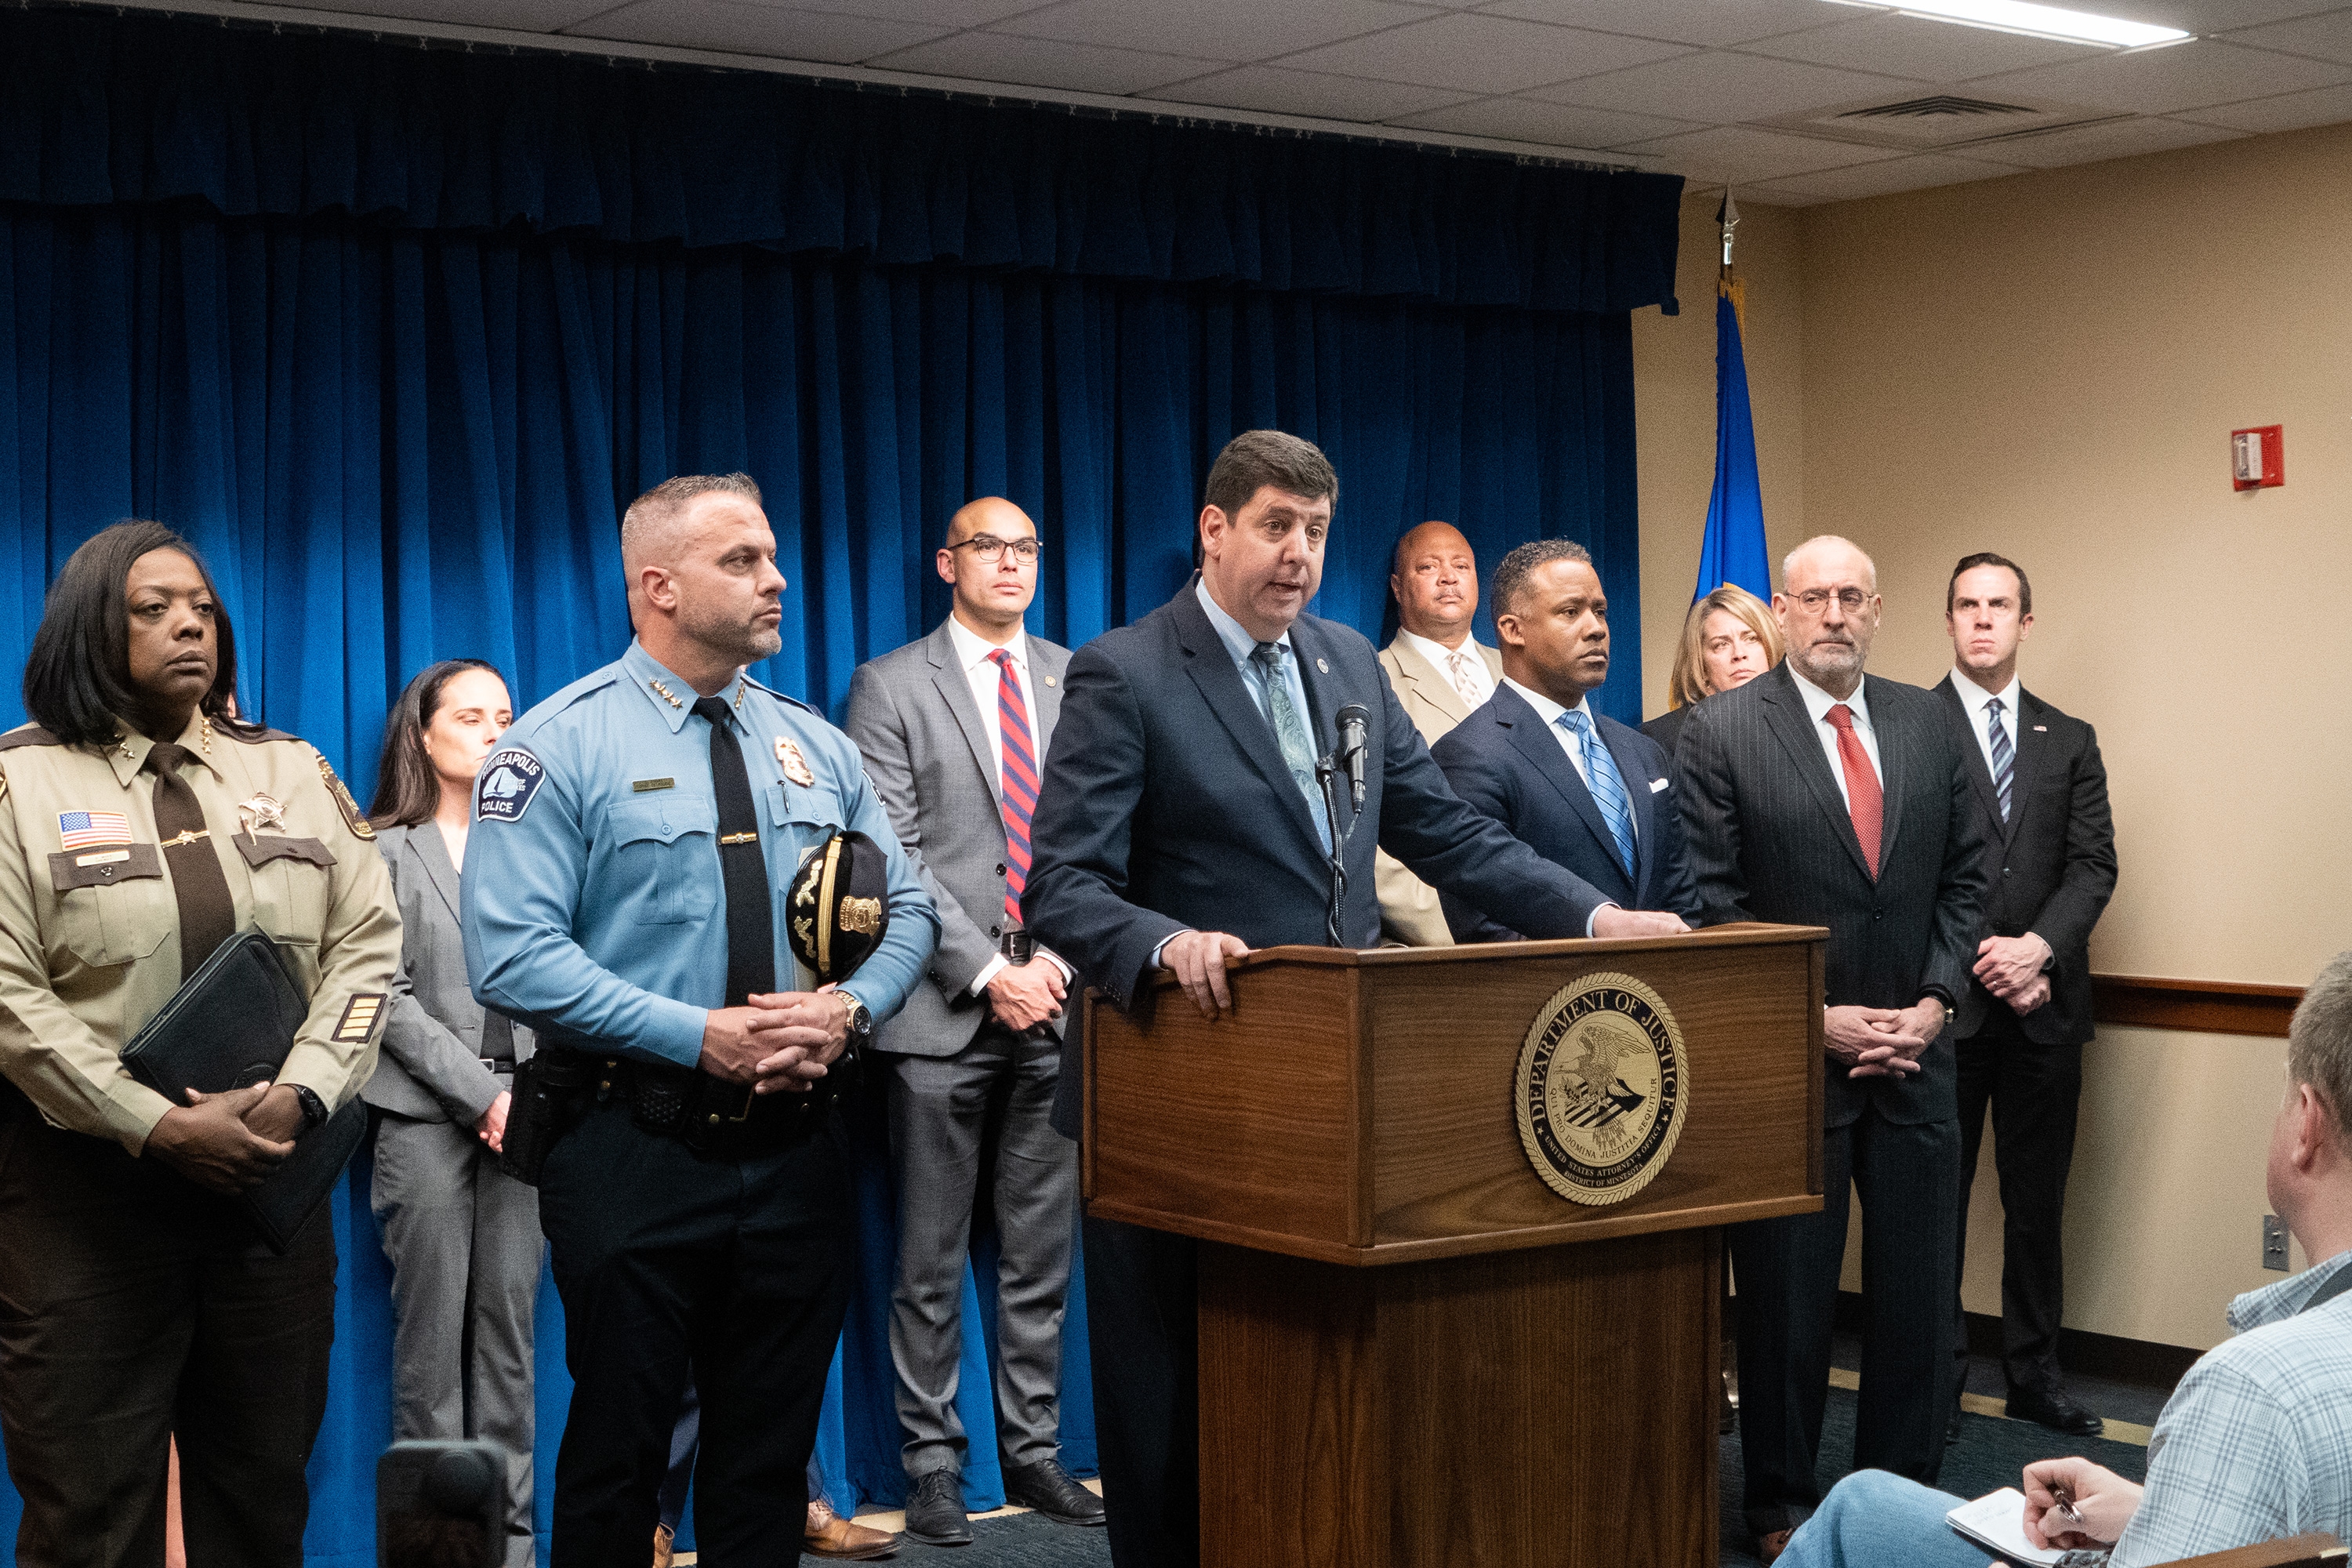 ATF Director Steven M. Dettelbach delivers remarks from a podium bearing the United States Attorney's Office for the District of Minnesota seal. To the left stands Chief of the Minneapolis Police Department Brian O'Hara (left) and Hennepin County Sheriff Dawanna S. Witt (far left). To the right stands Assistant Attorney General Kenneth A. Polite, Jr. (right) and United States Attorney for the District of Minnesota Andrew M. Luger (far right). Other officials stand in a row behind.